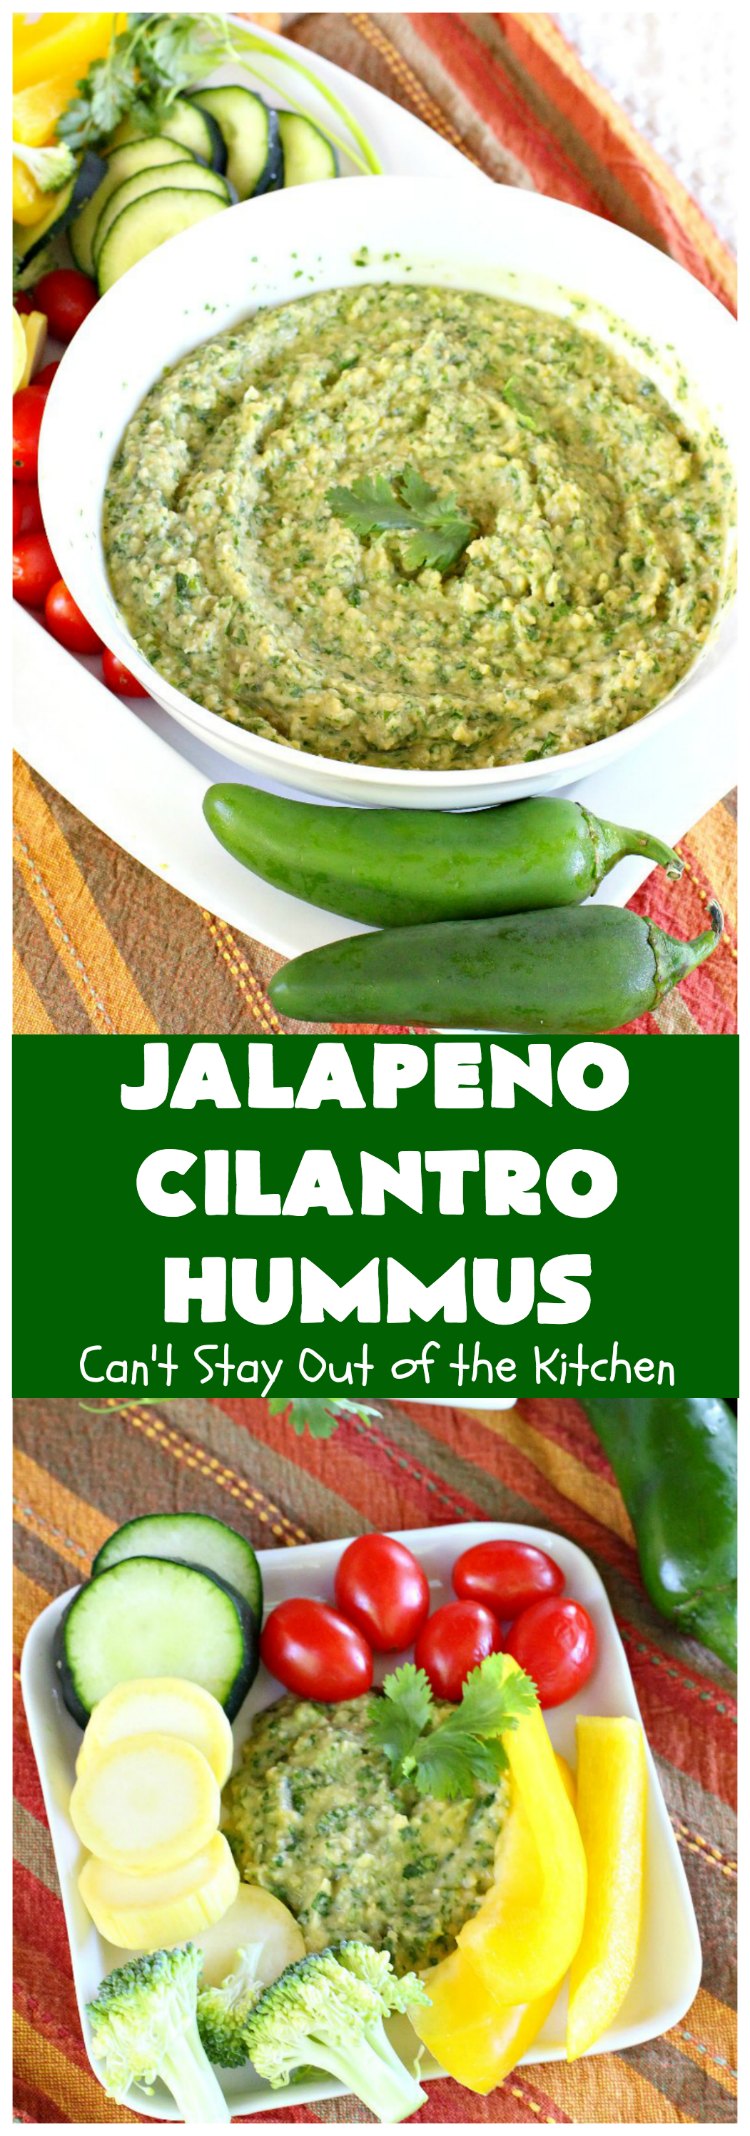 Jalapeno Cilantro Hummus | Can't Stay Out of the Kitchen